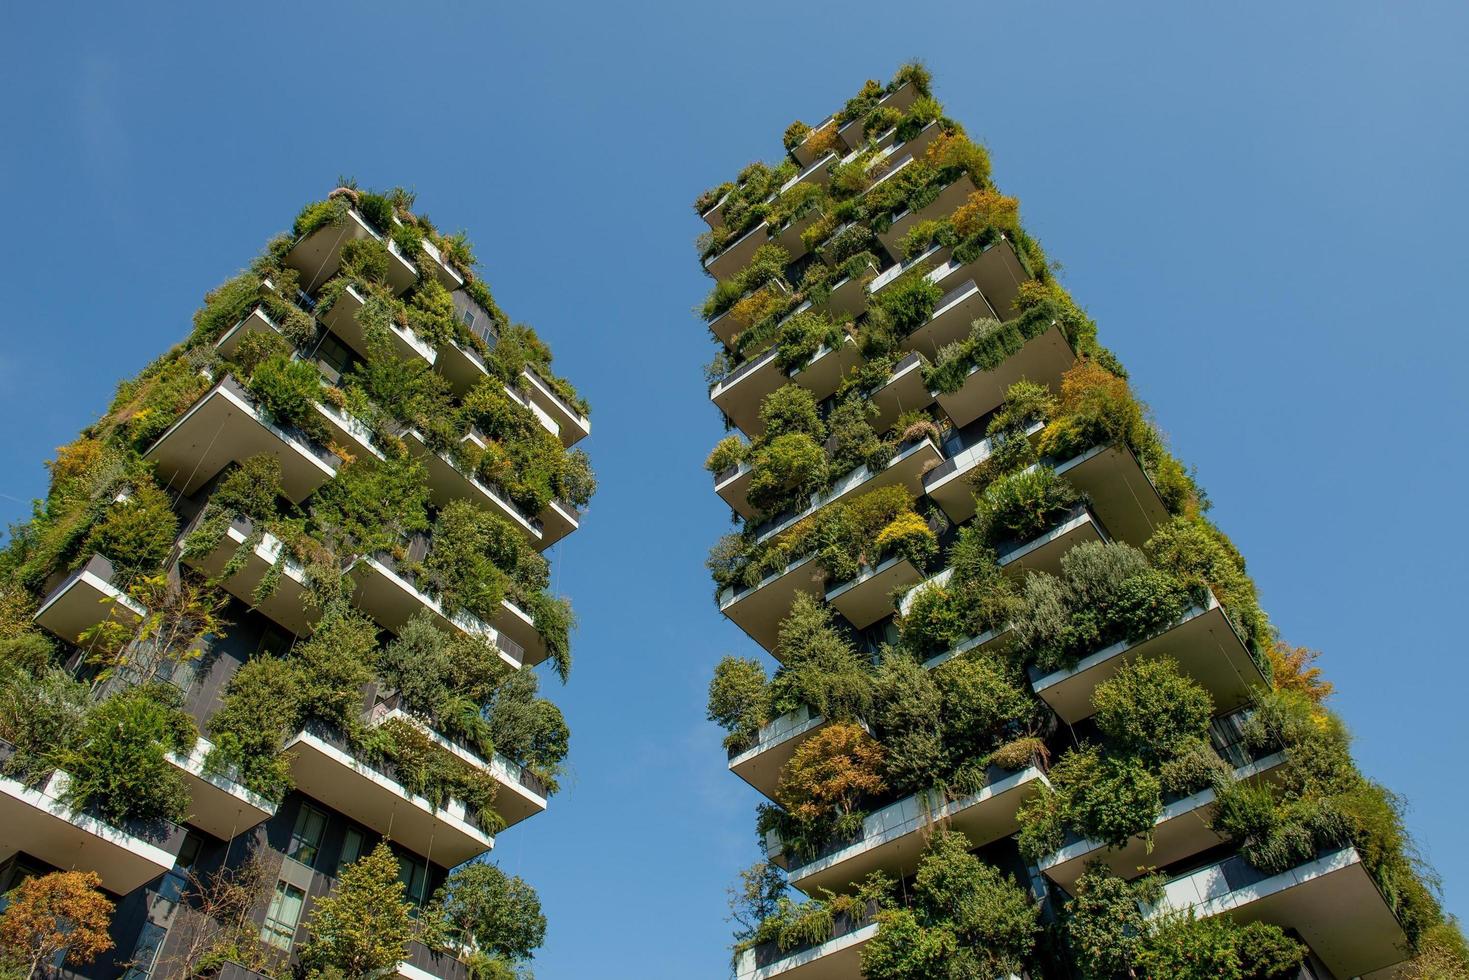 Milan Italy 2018 Vertical forest of Milan, the most innovative skyscraper in the world photo